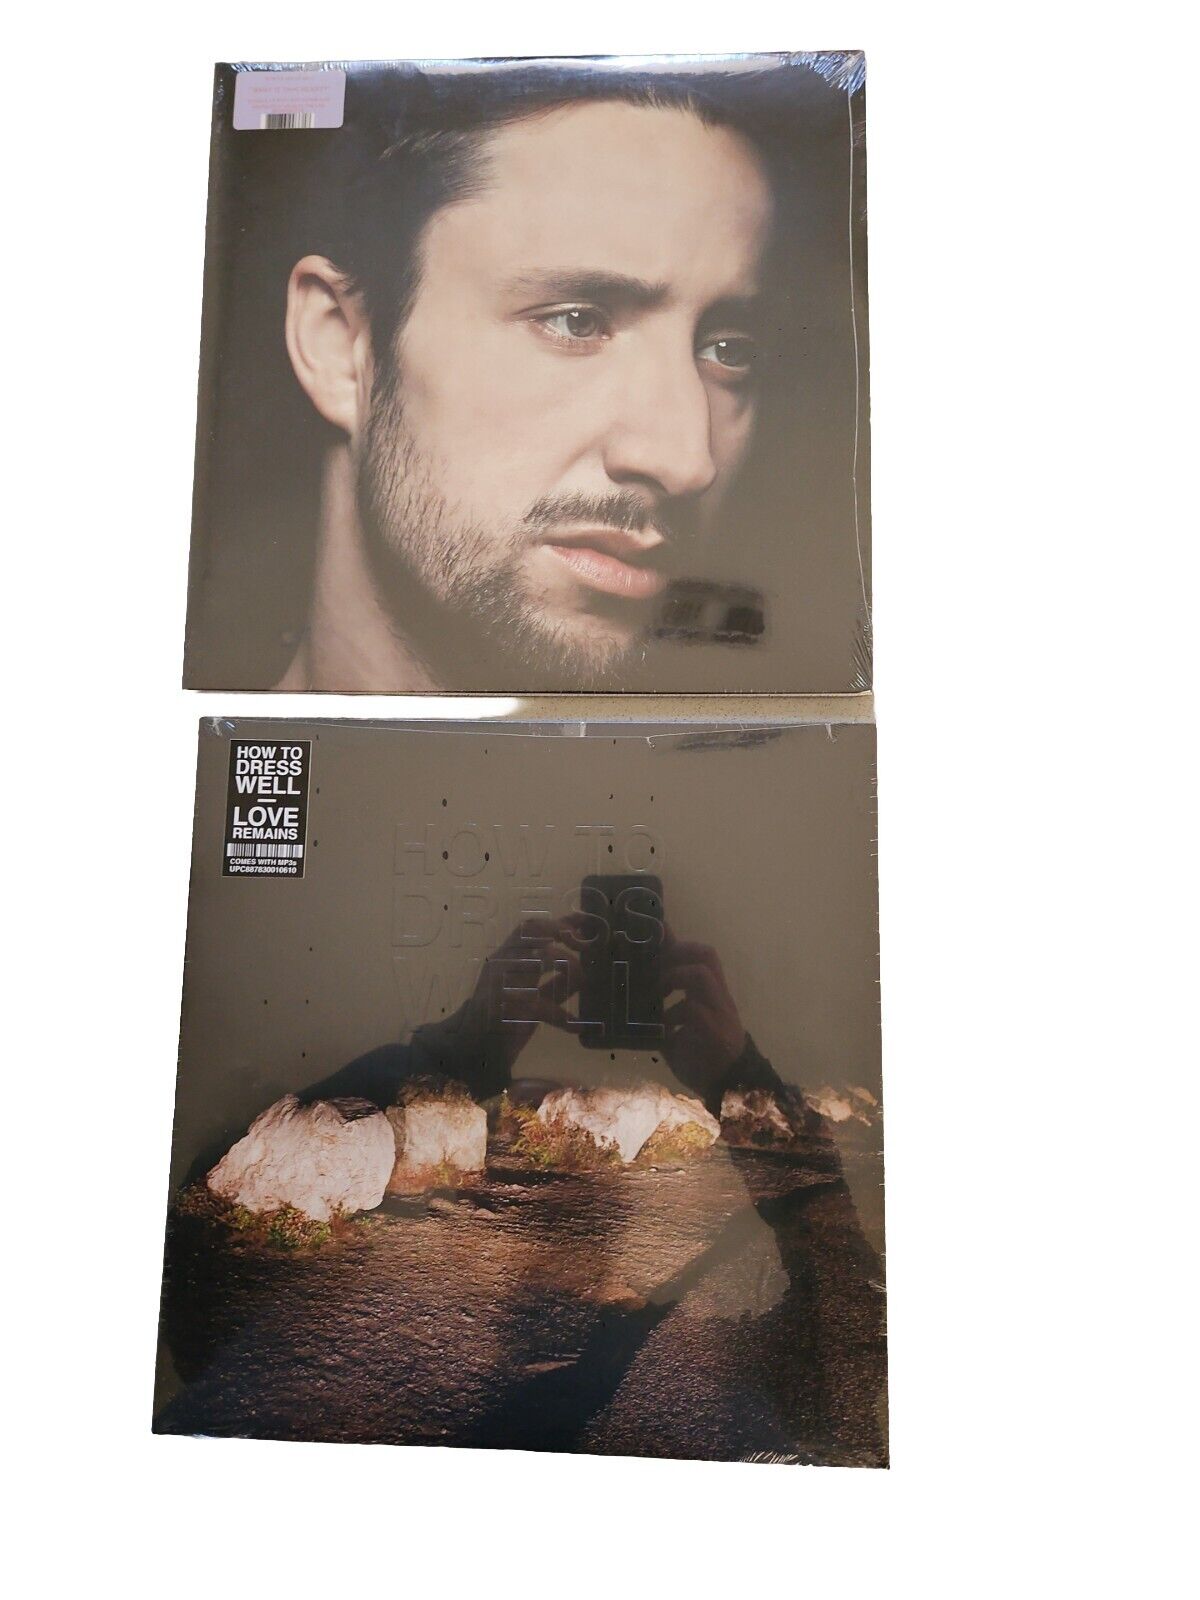 Two Albums By How To Dress Well - Brand New Vinyl